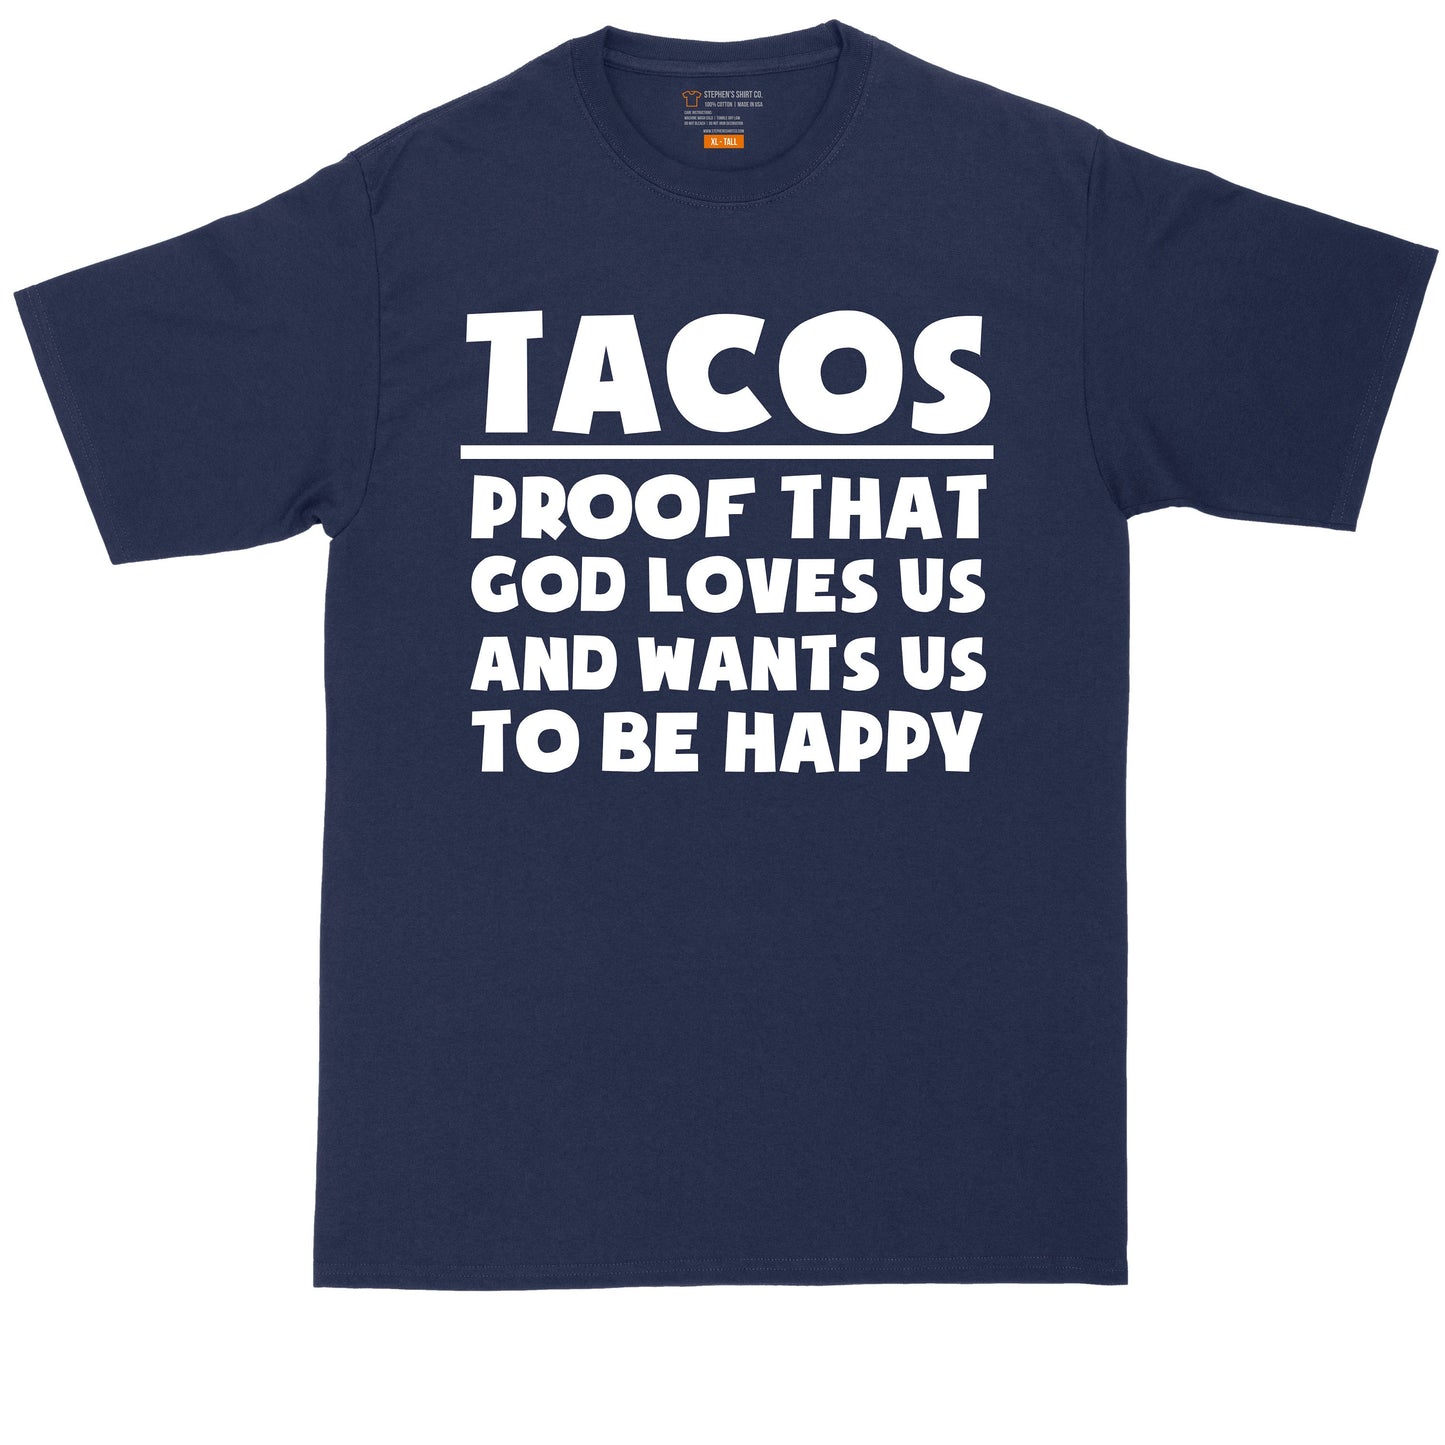 Mens Graphic Taco Shirt | Tacos Proof that God Loves Us and Wants Us to Be Happy | Mens Big and Tall T-Shirt